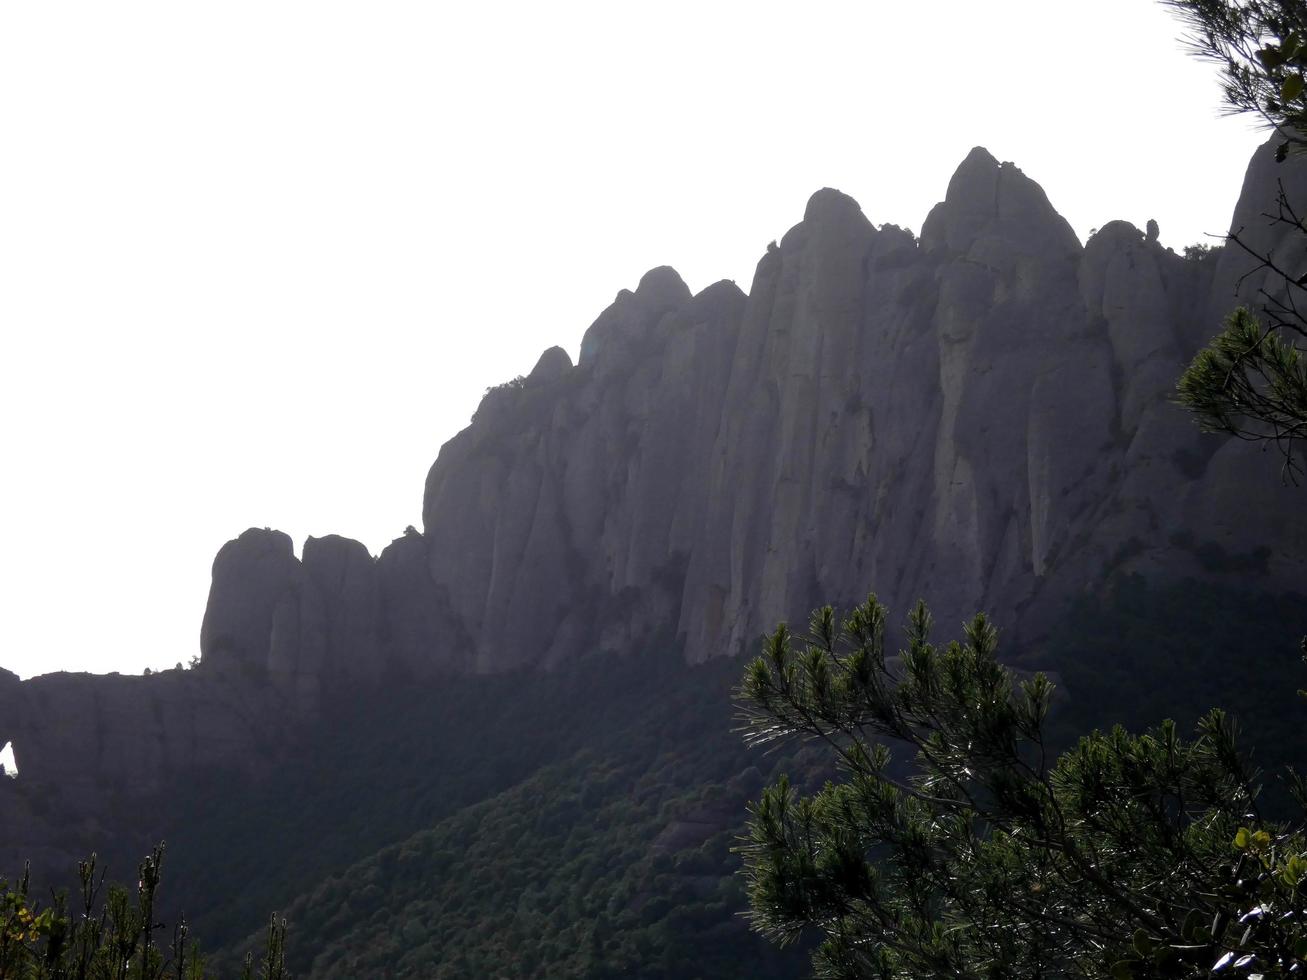 Profile of the montserrat mountains in the province of Barcelona, Catalonia, Spain. photo